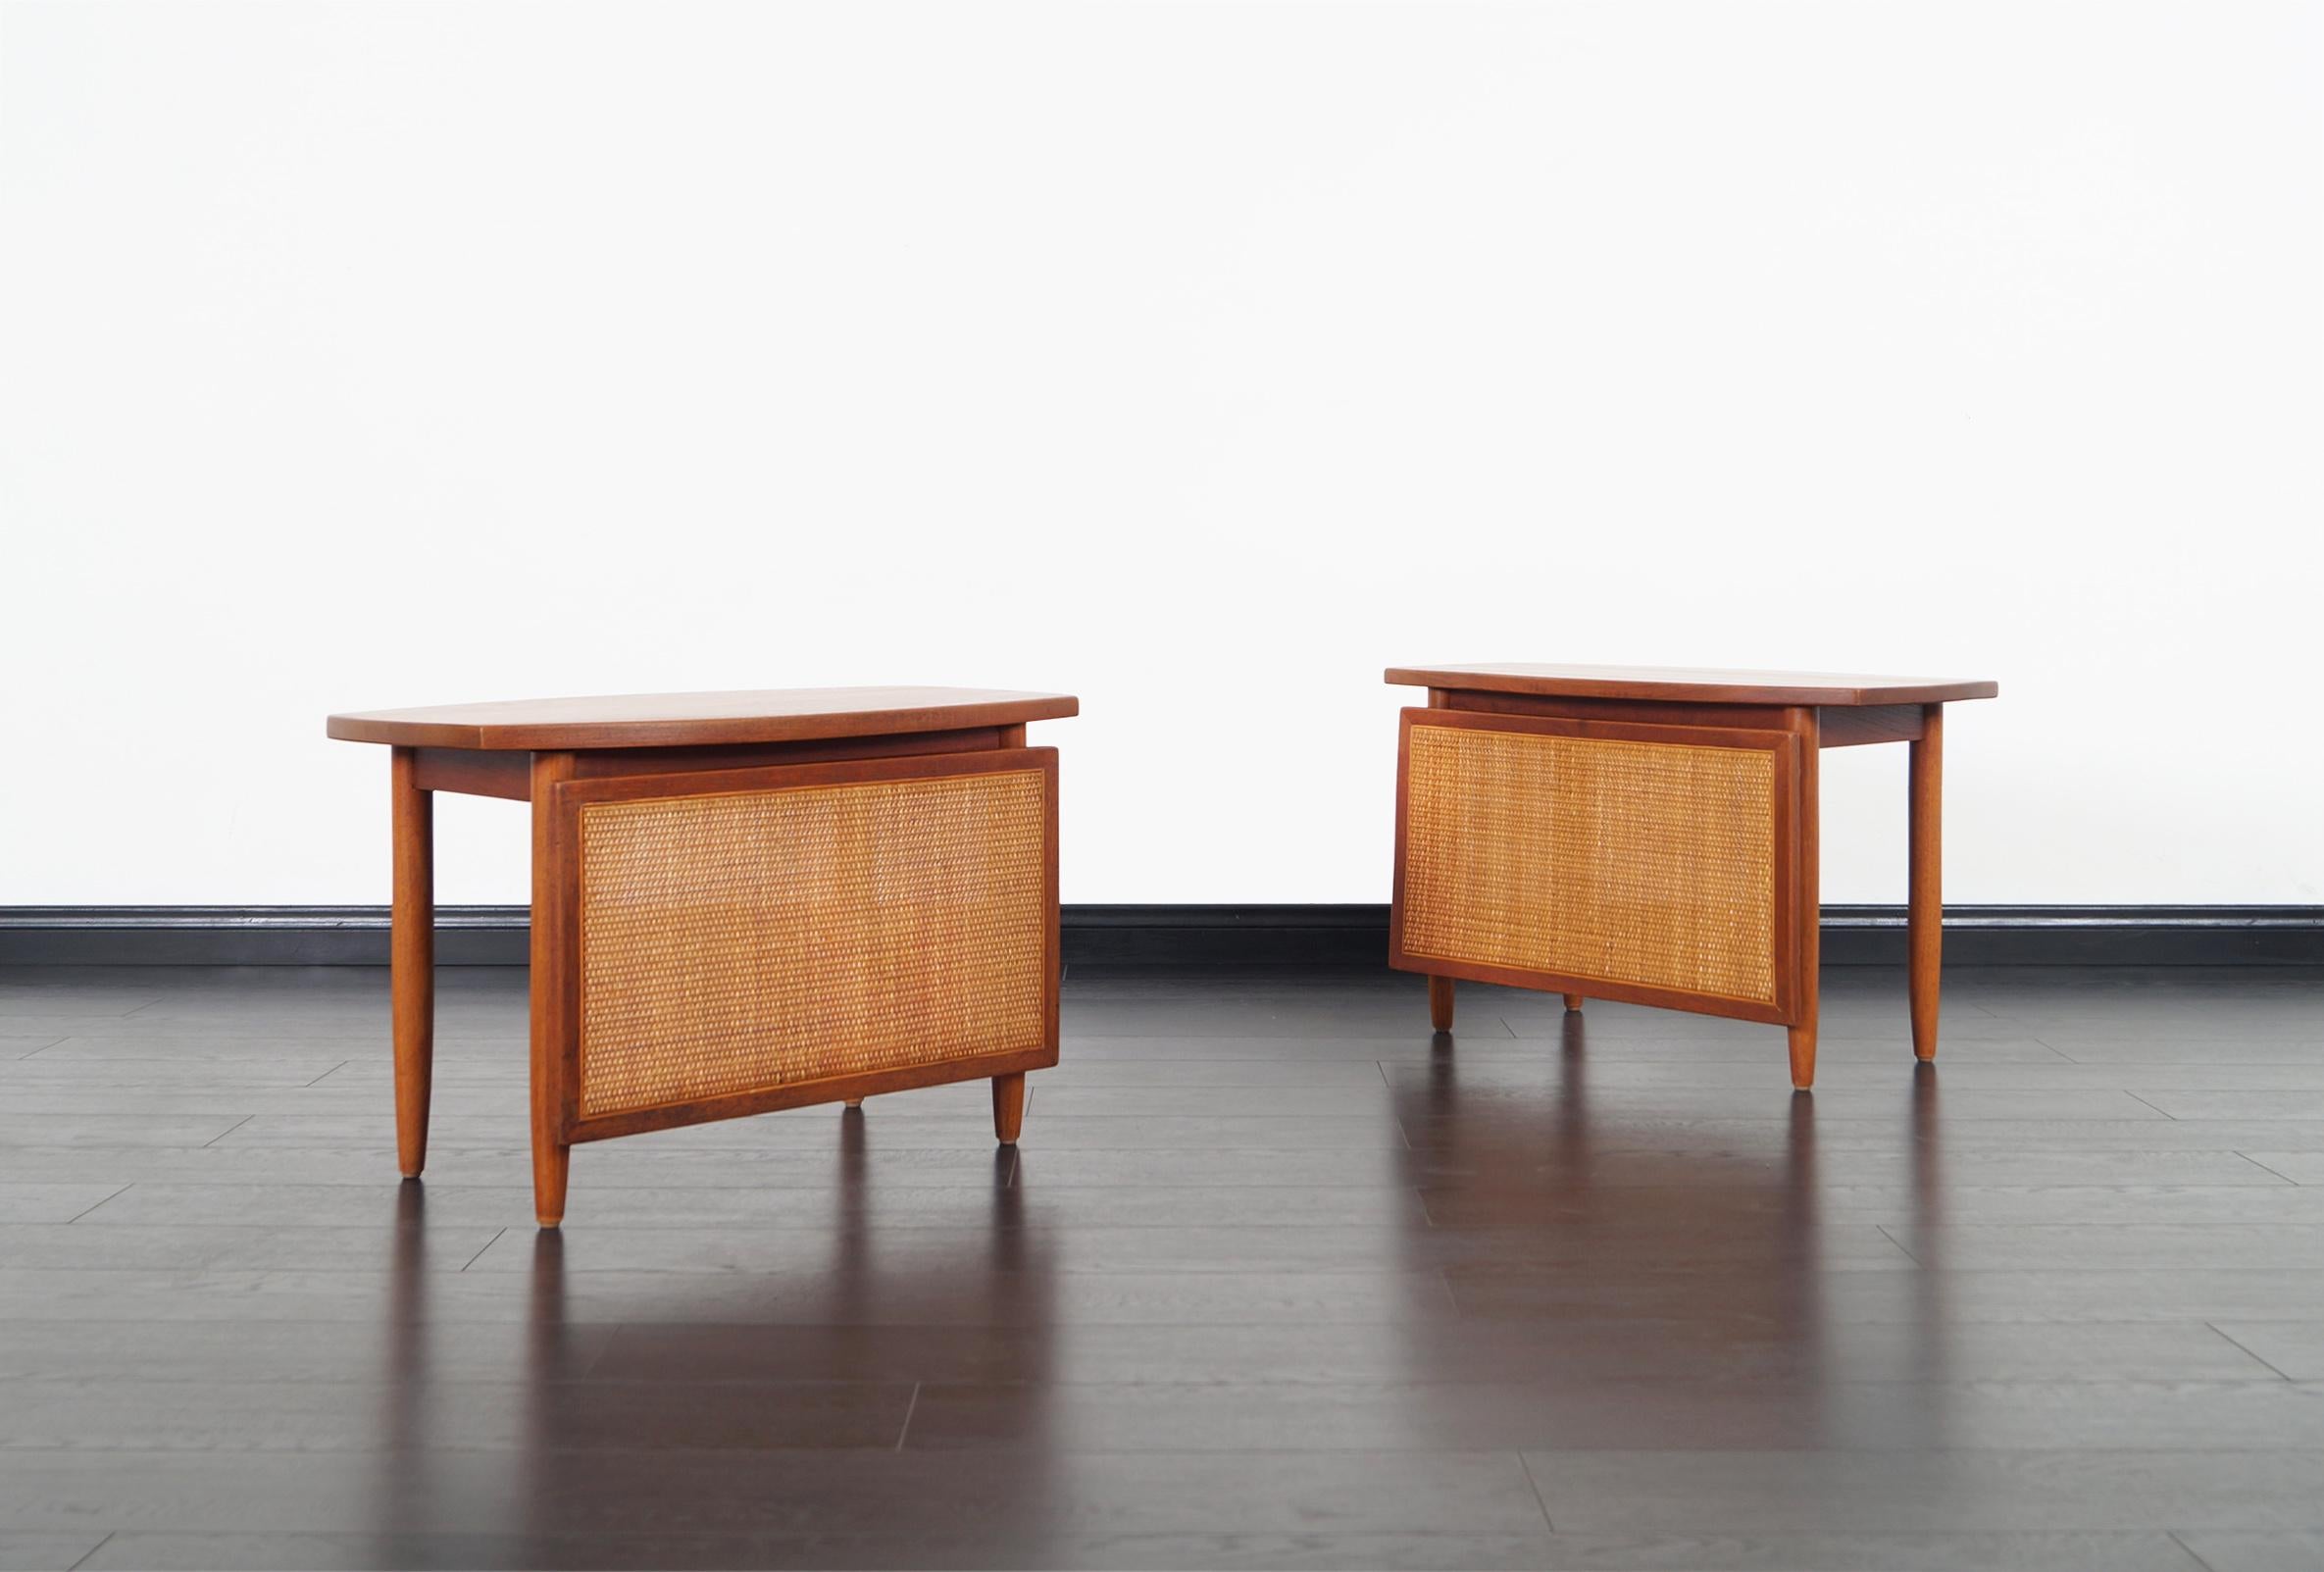 Fabulous pair of Danish modern teak side tables by Peter Hvidt and Mølgaard-Nielsen for Søborg Møbelfabrik. Crafted from solid teak with woven cane panel.